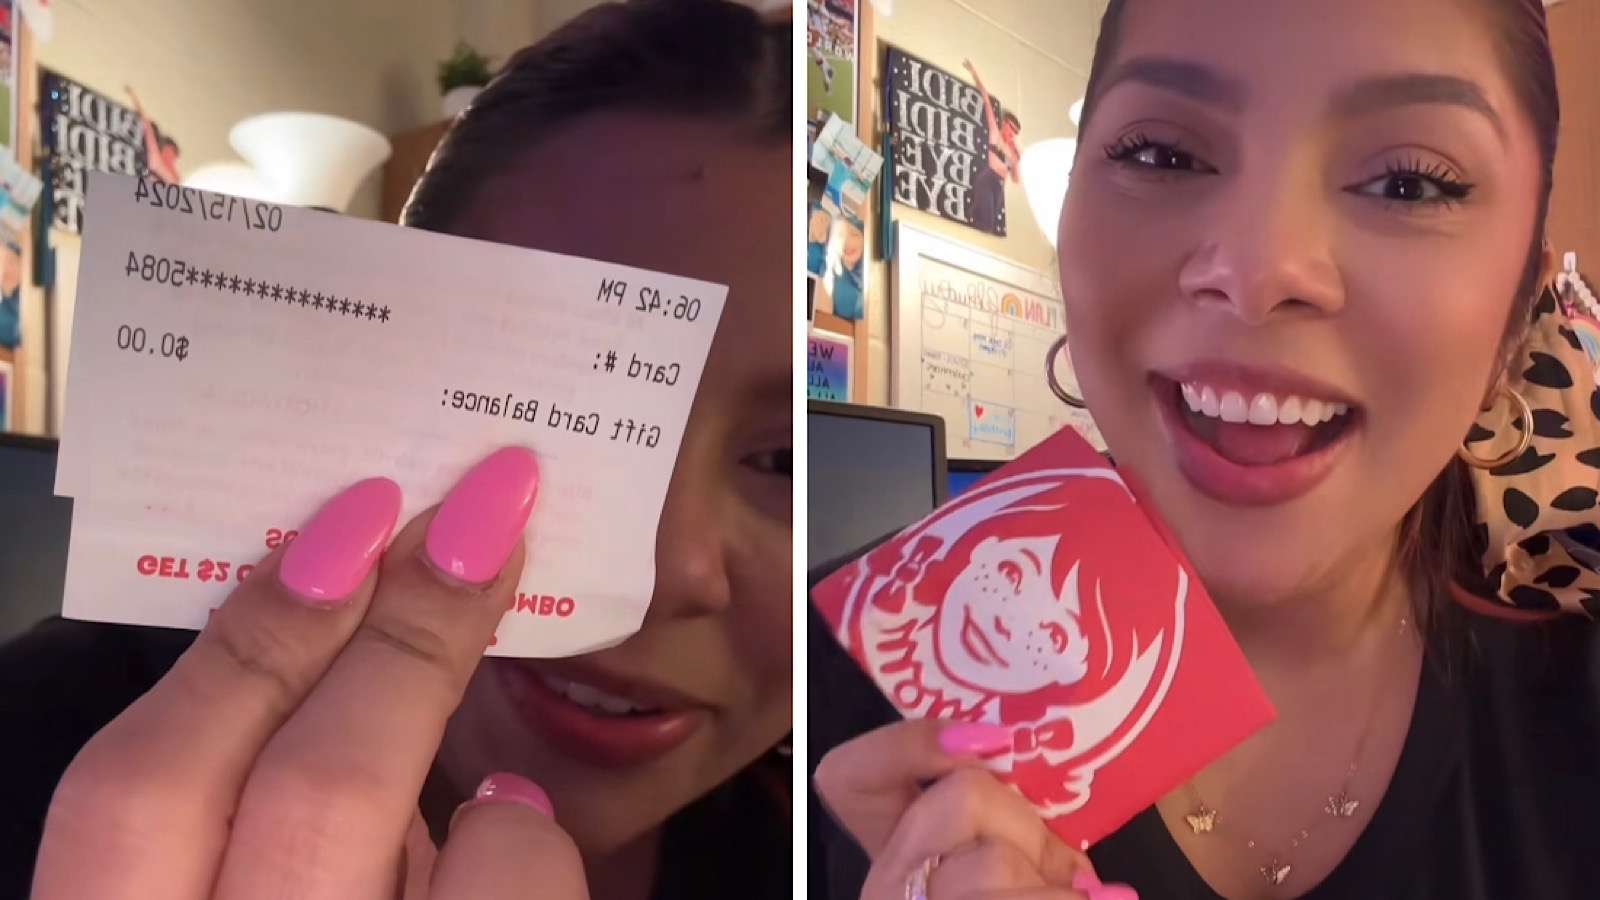 wendy's gift card